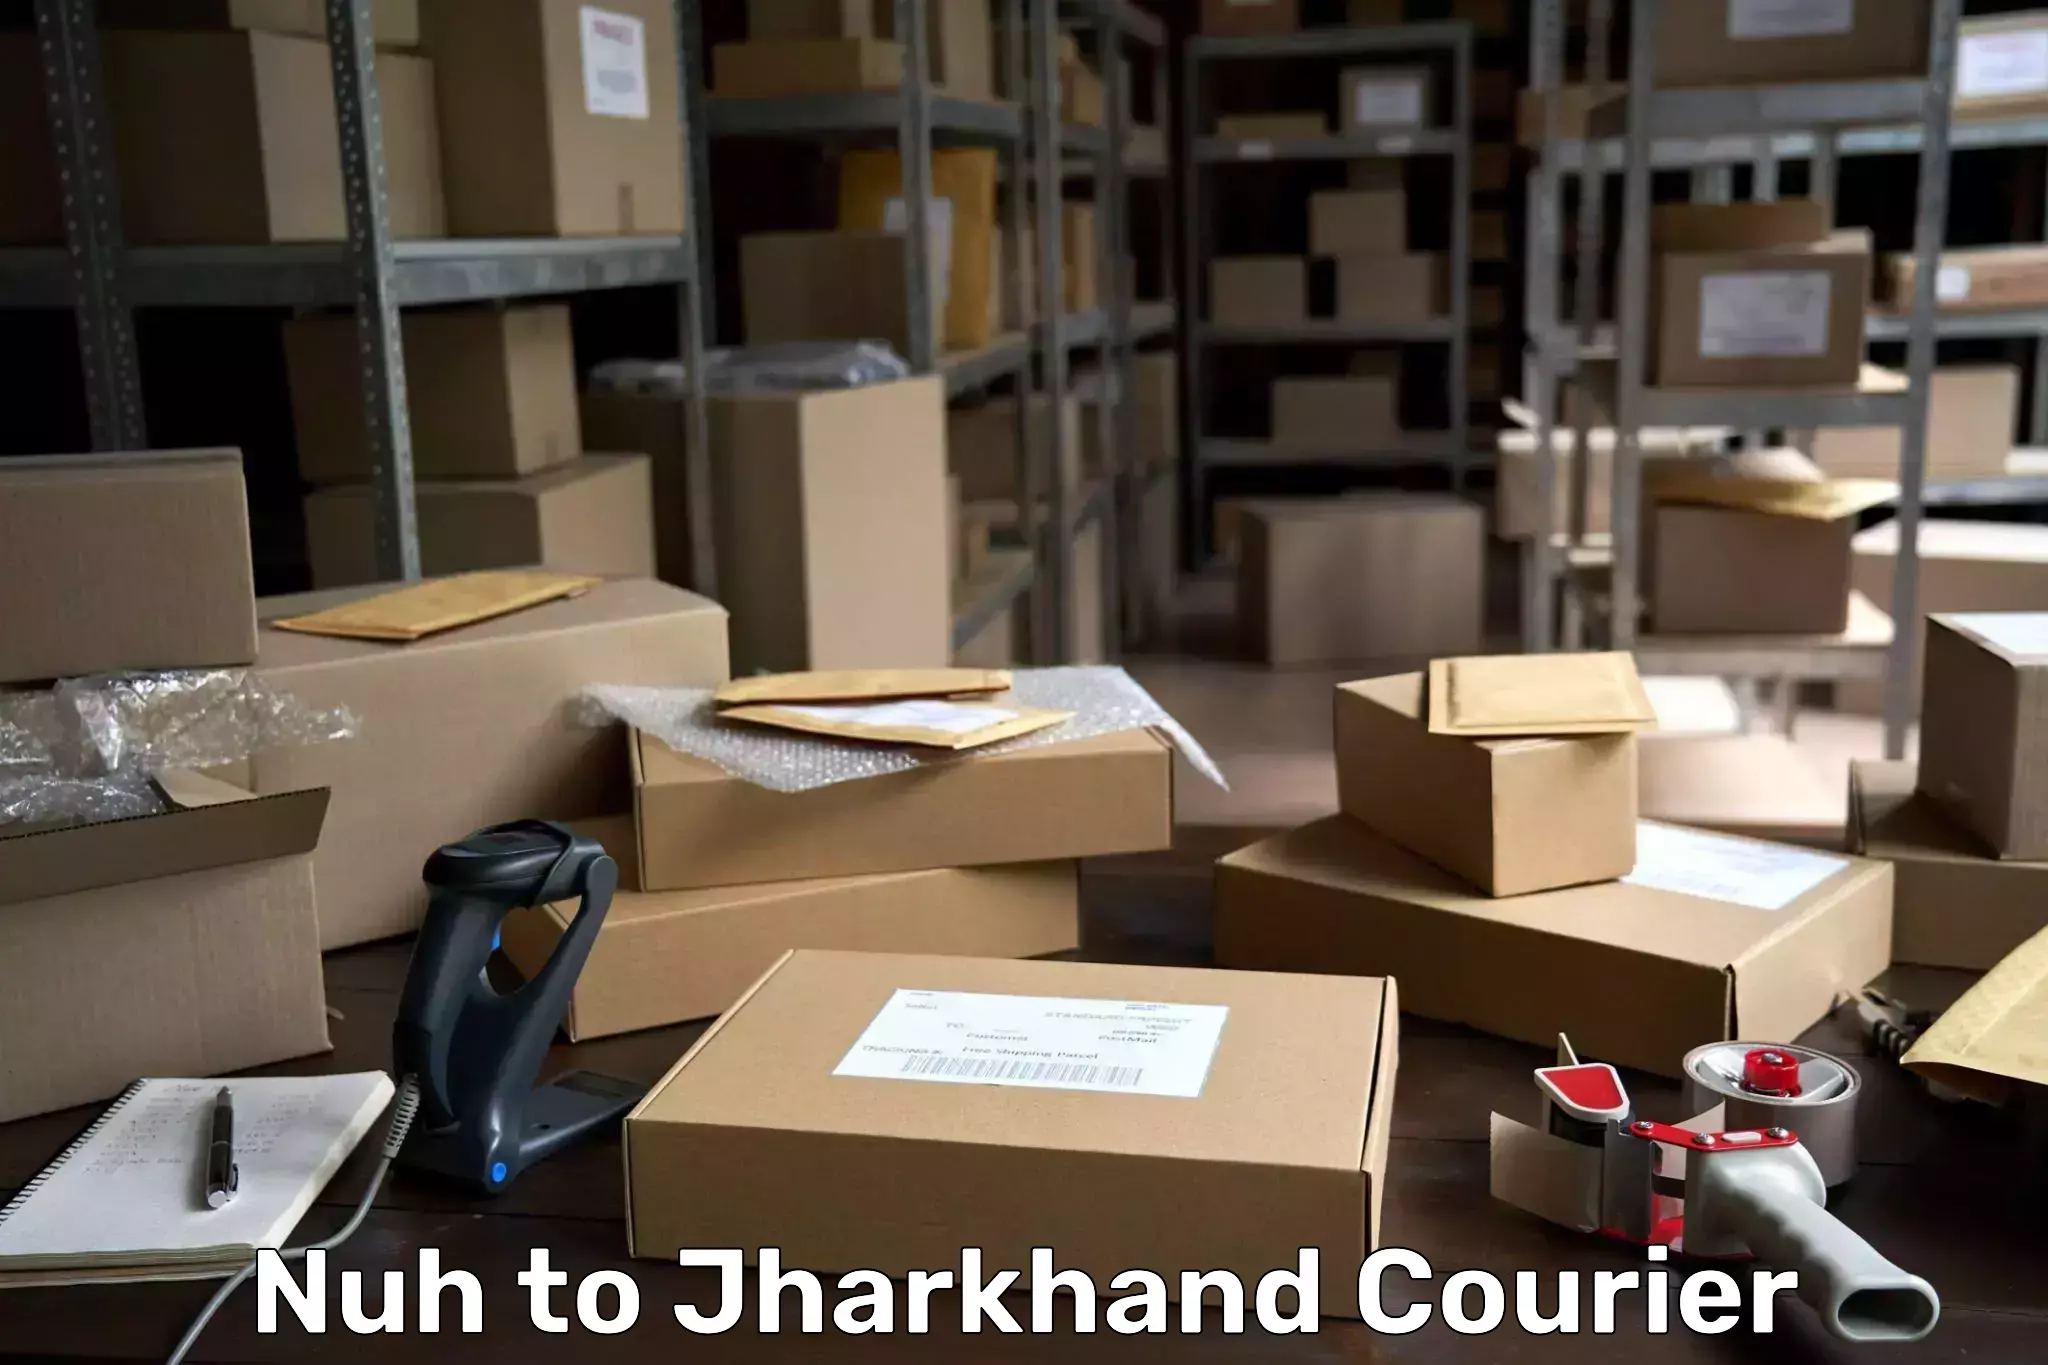 User-friendly courier app Nuh to Jamshedpur